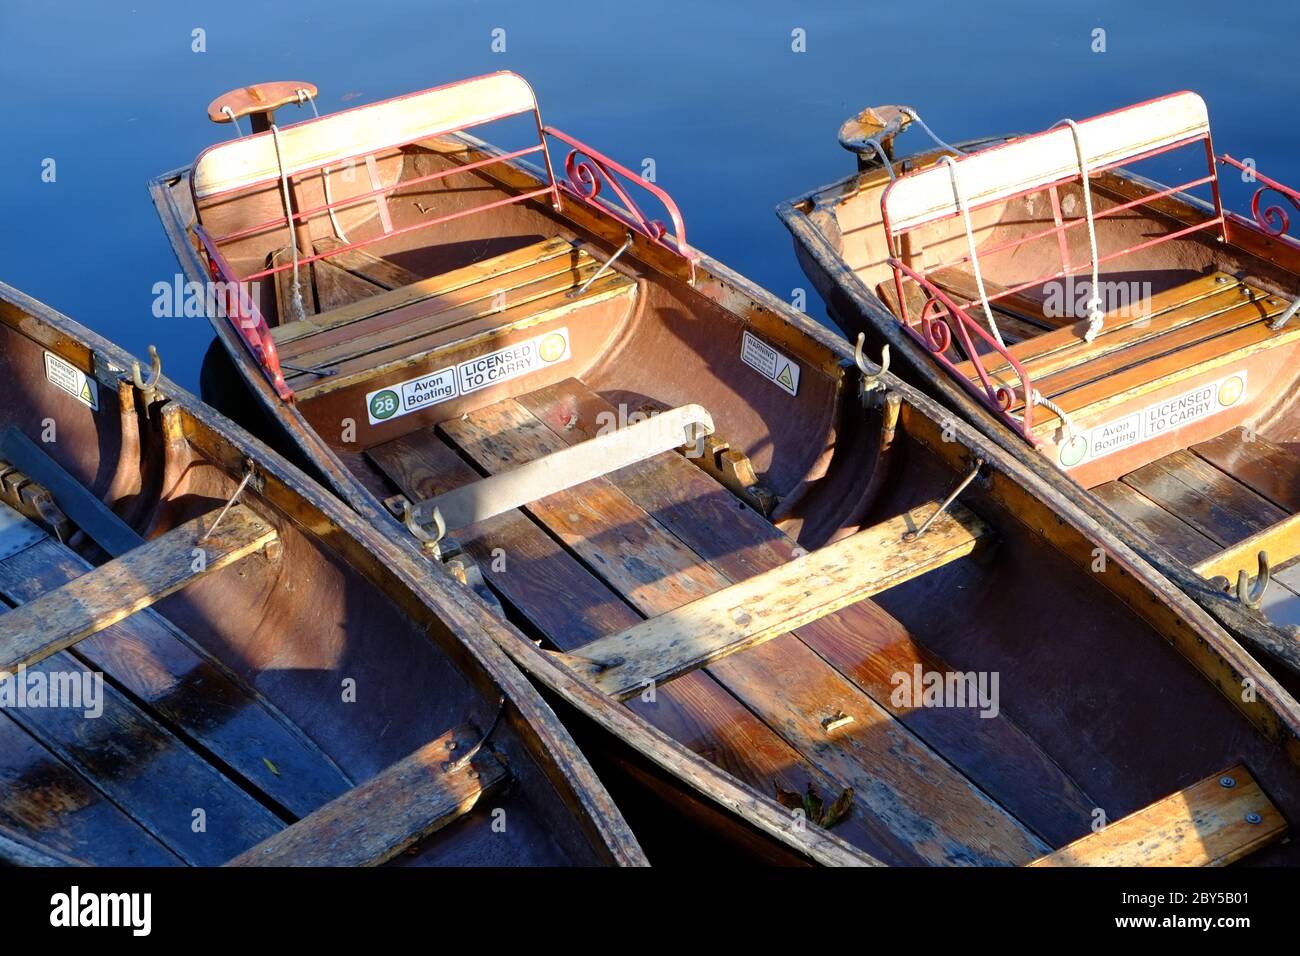 Rowing boats for hire on the Avon River at Stratford-upon-Avon, Warwickshire, England, UK. Stock Photo